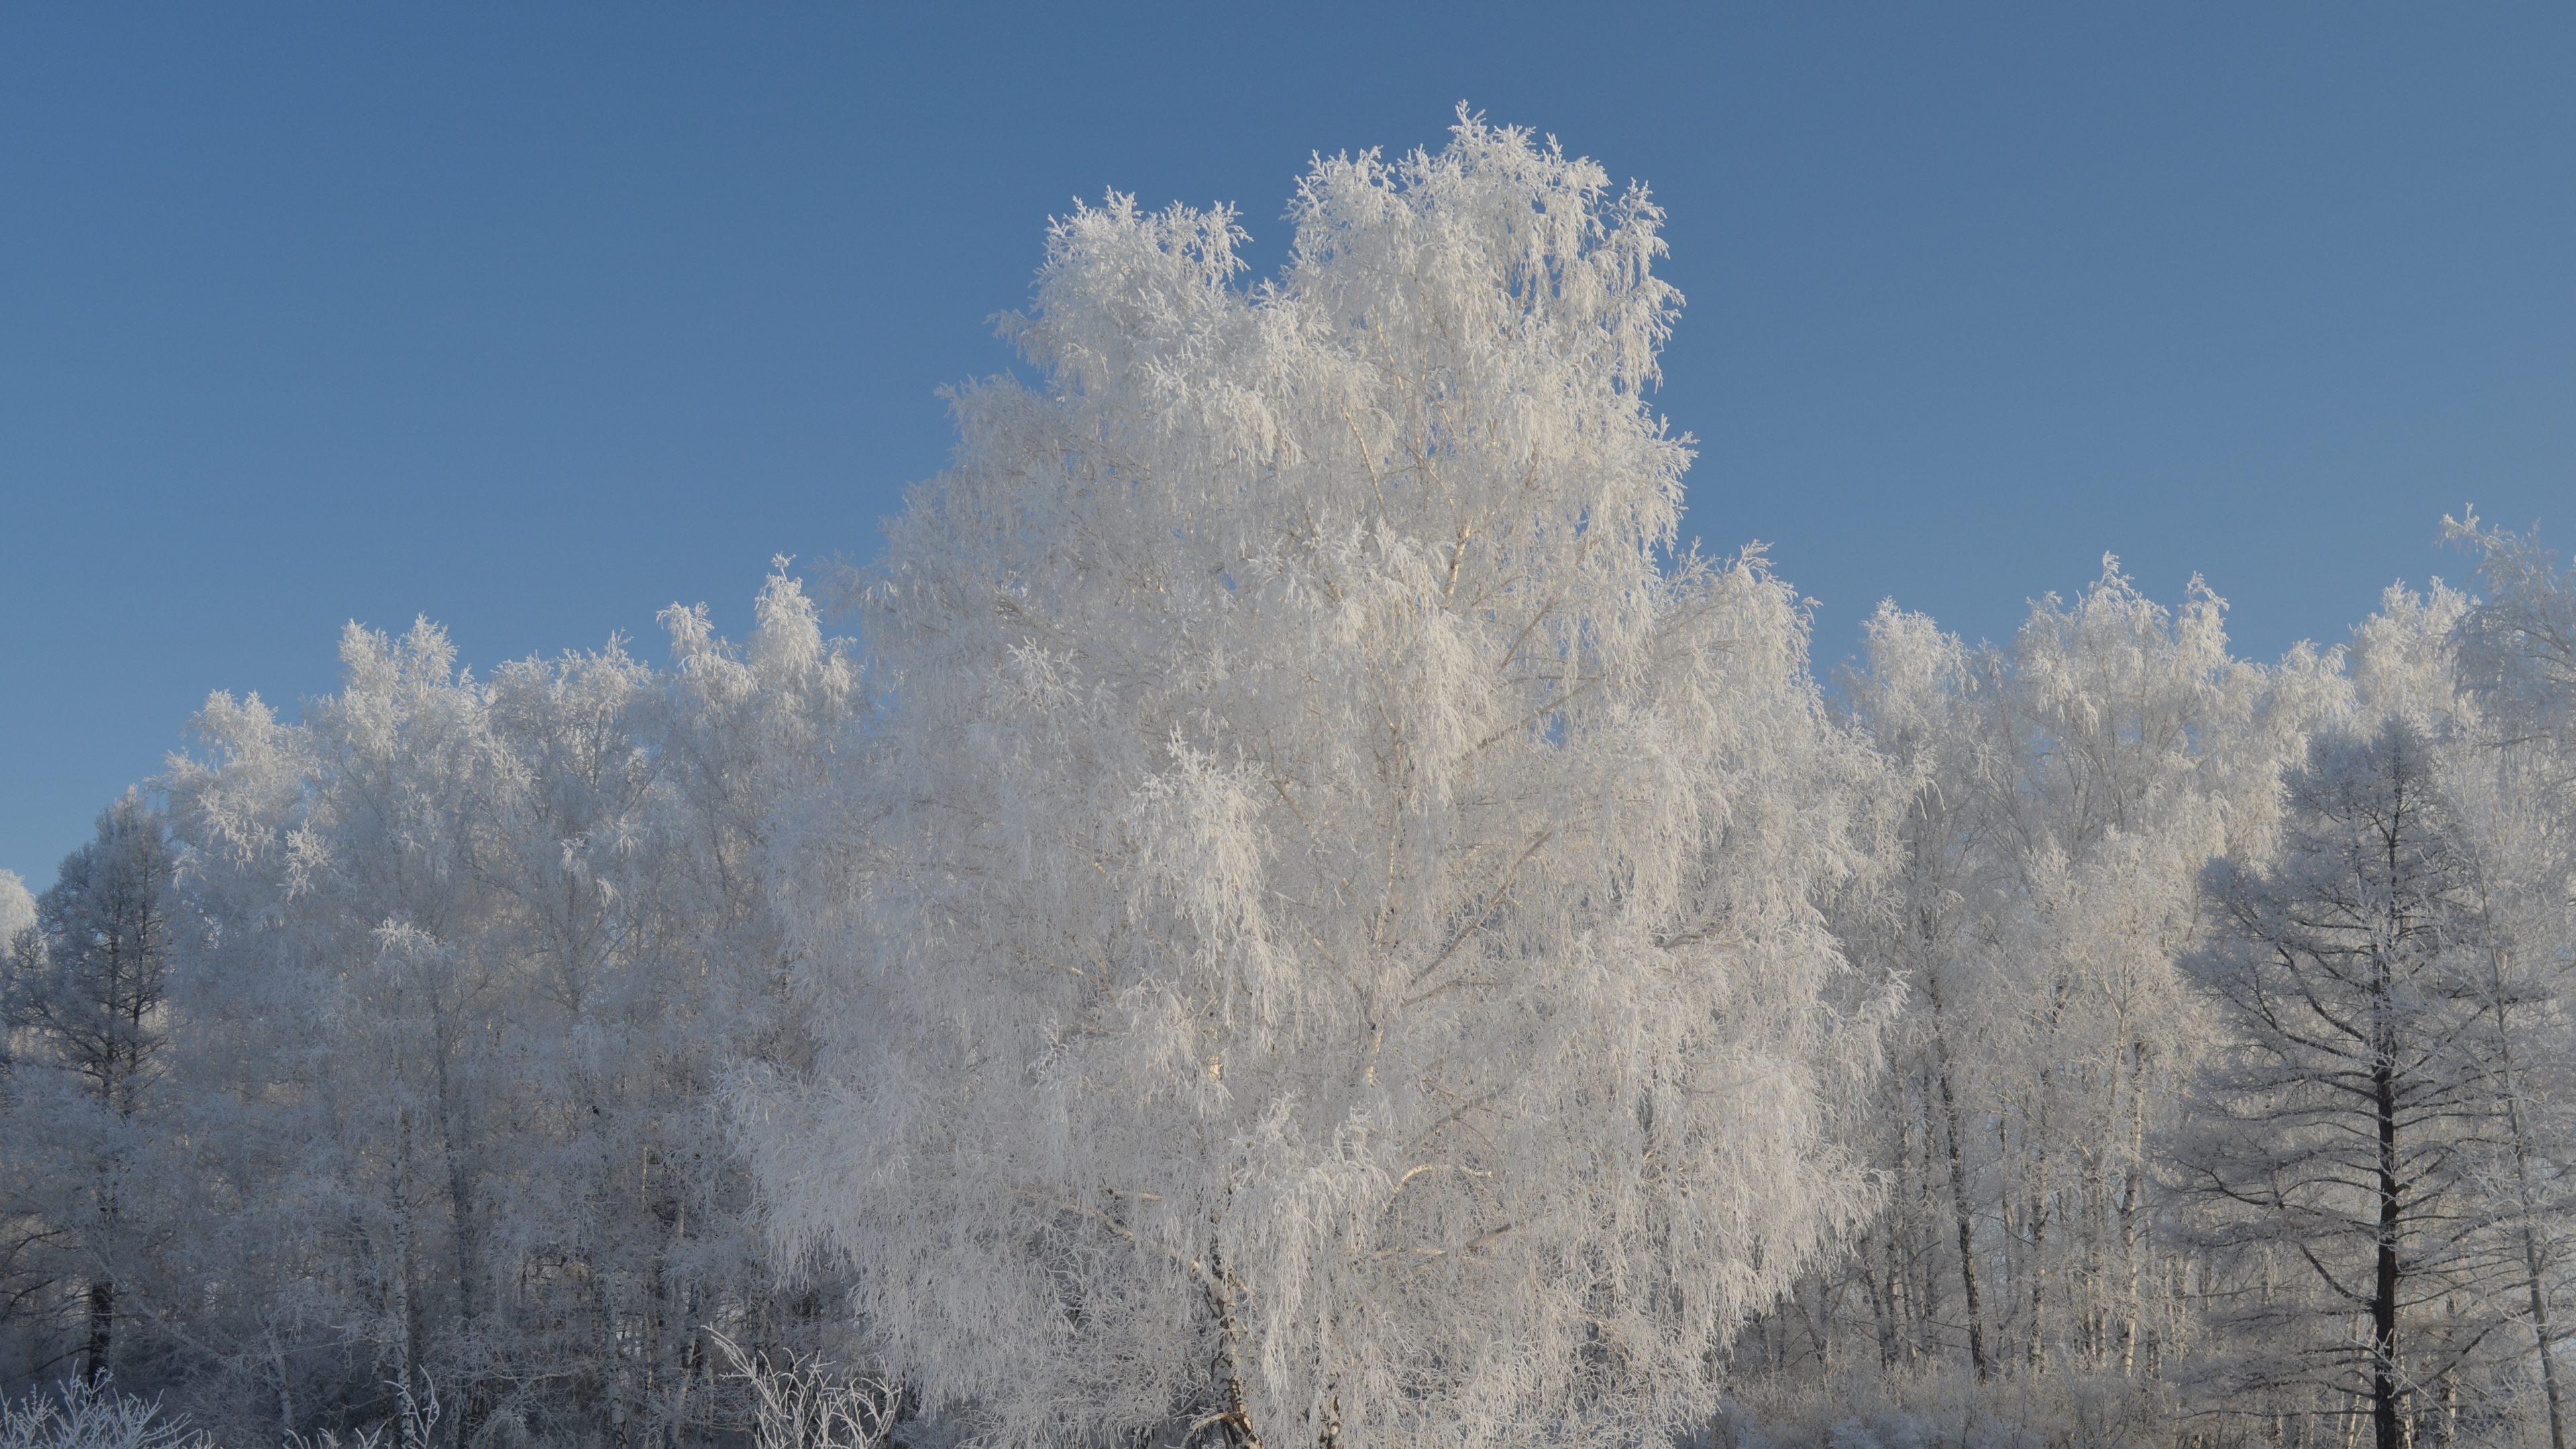 White Trees Covered by Snow During Daytime. Wallpaper in 3840x2160 Resolution